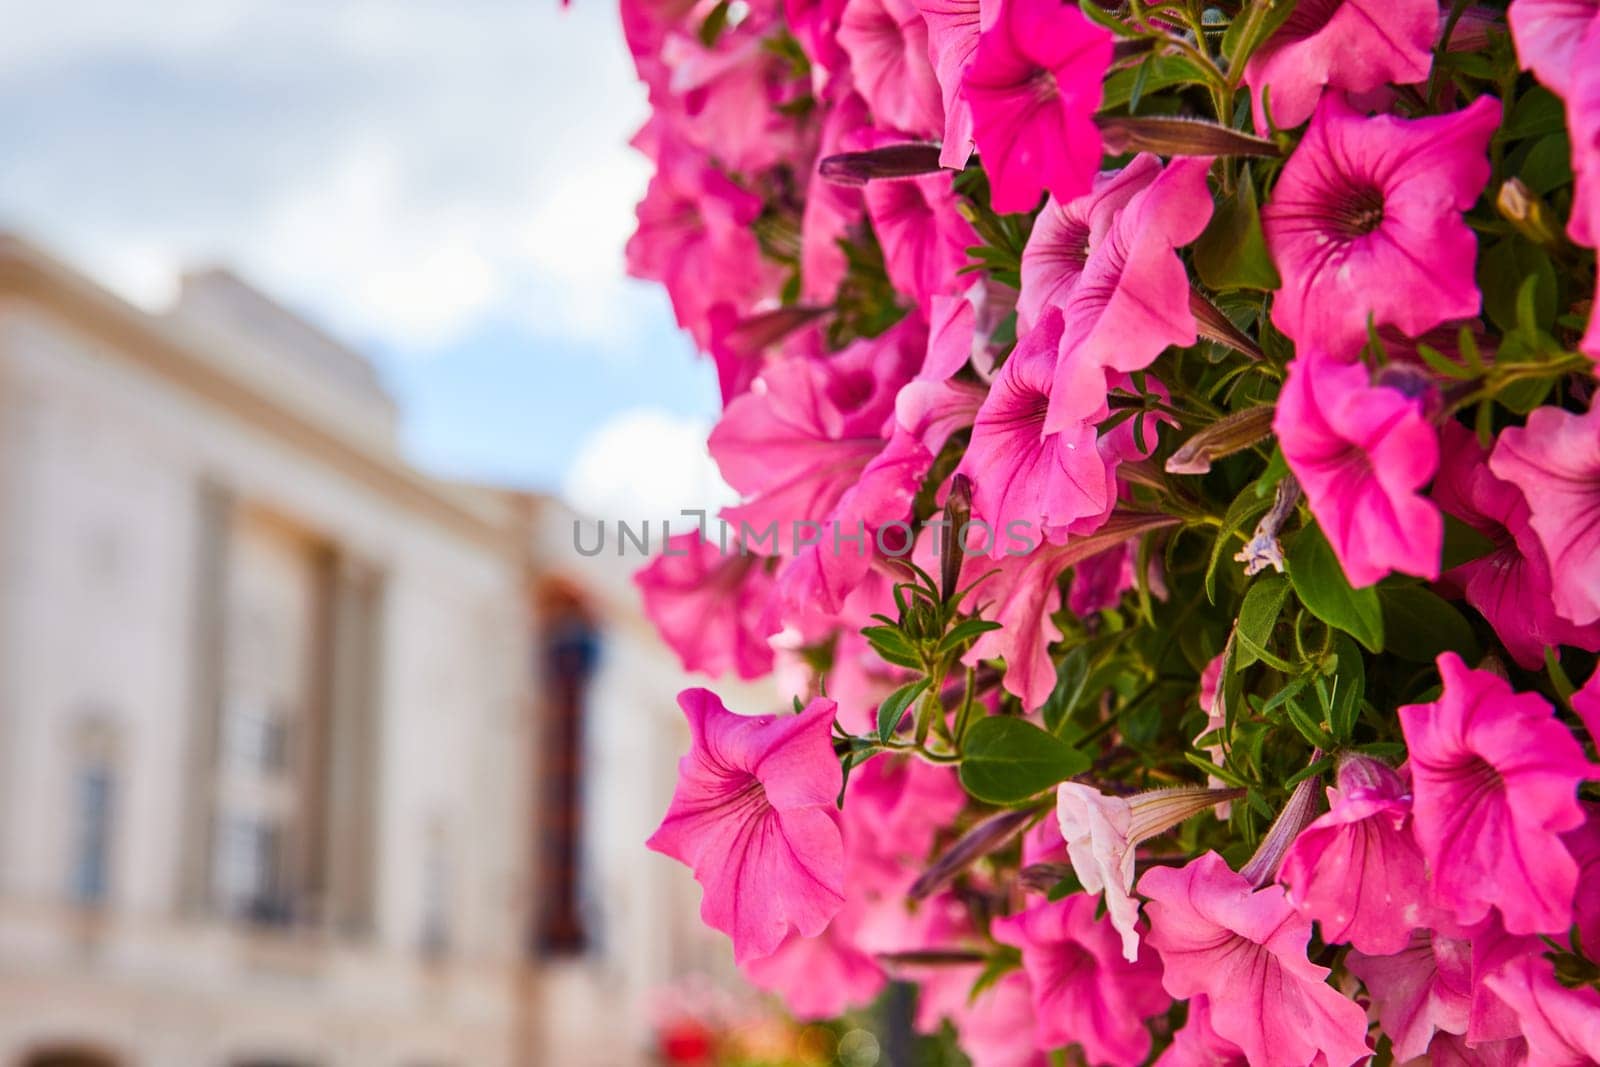 Blooming pink petunias against a classical facade in downtown Elkhart, Indiana, illustrating urban serenity and the beauty of city gardening in a daytime setting.